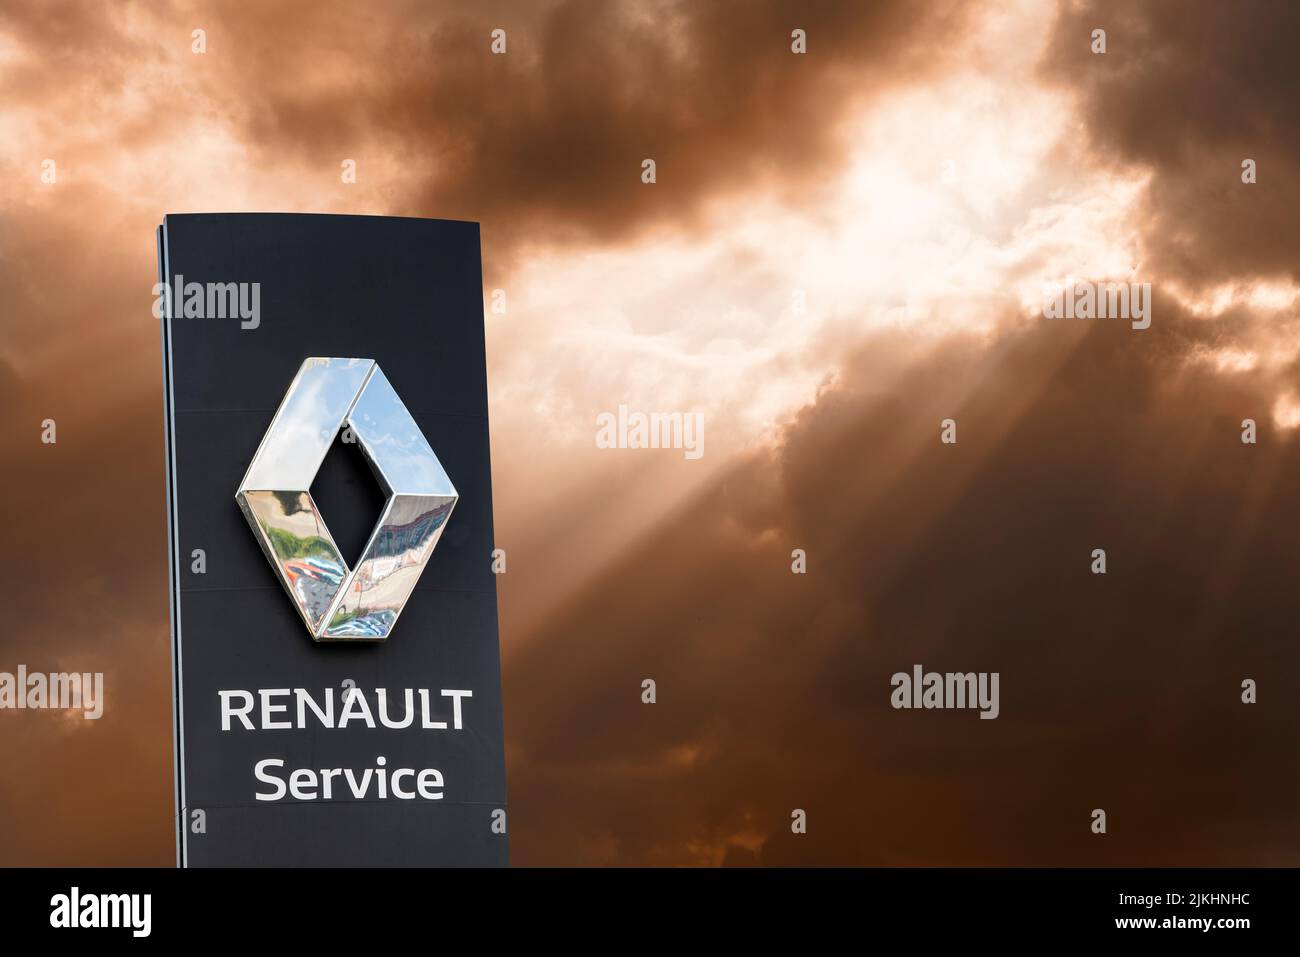 Renault car company sign and logo Stock Photo